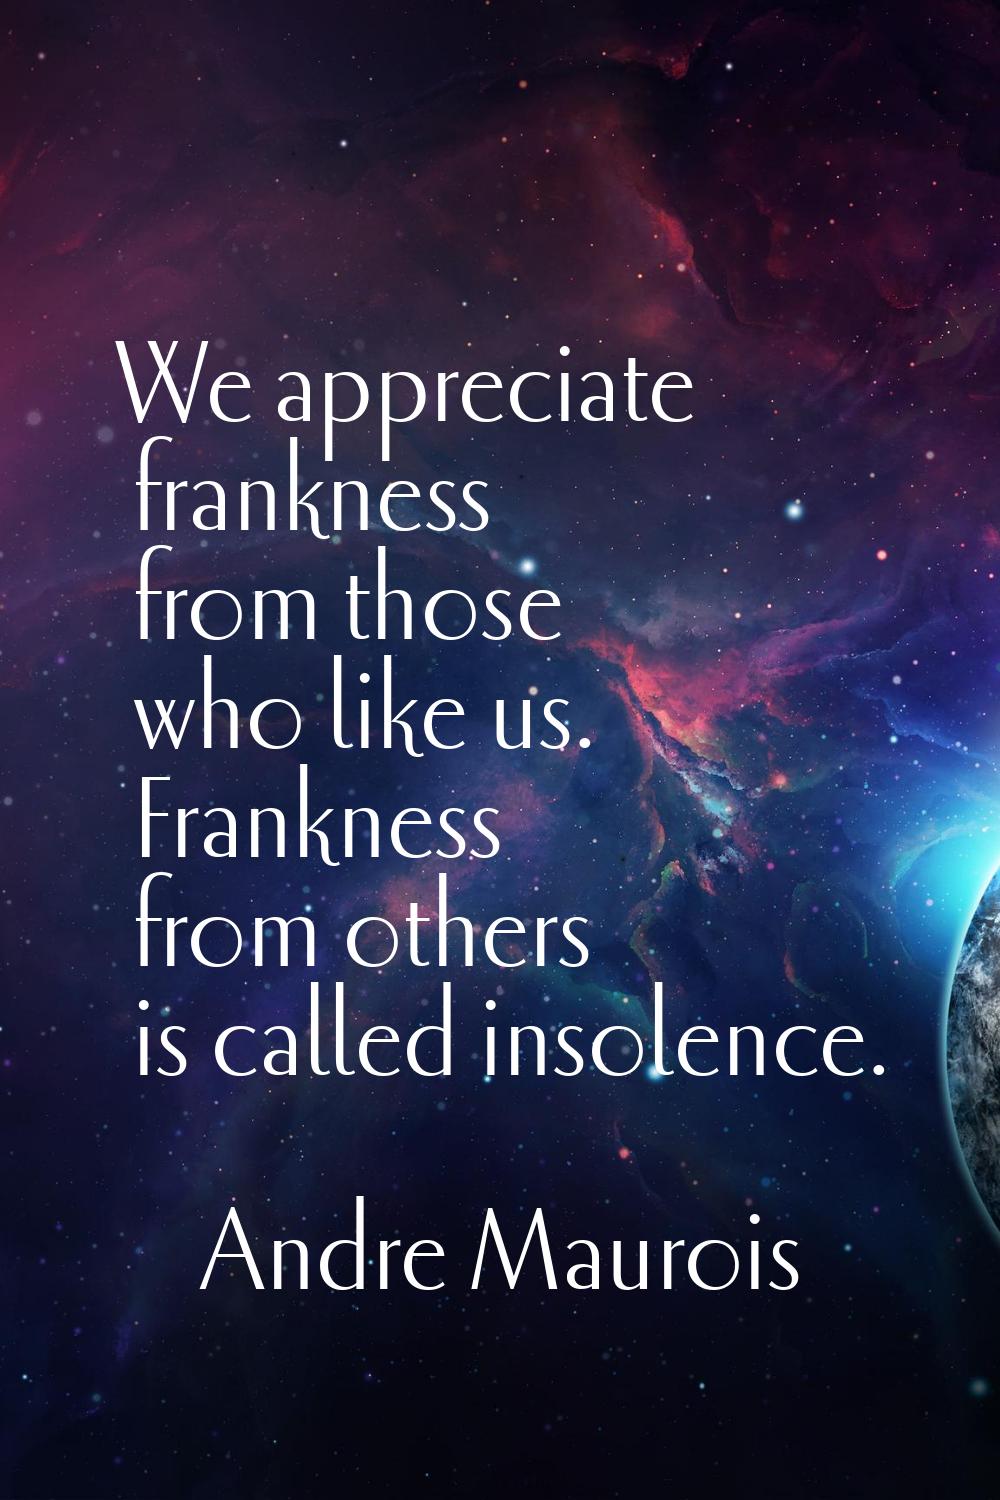 We appreciate frankness from those who like us. Frankness from others is called insolence.